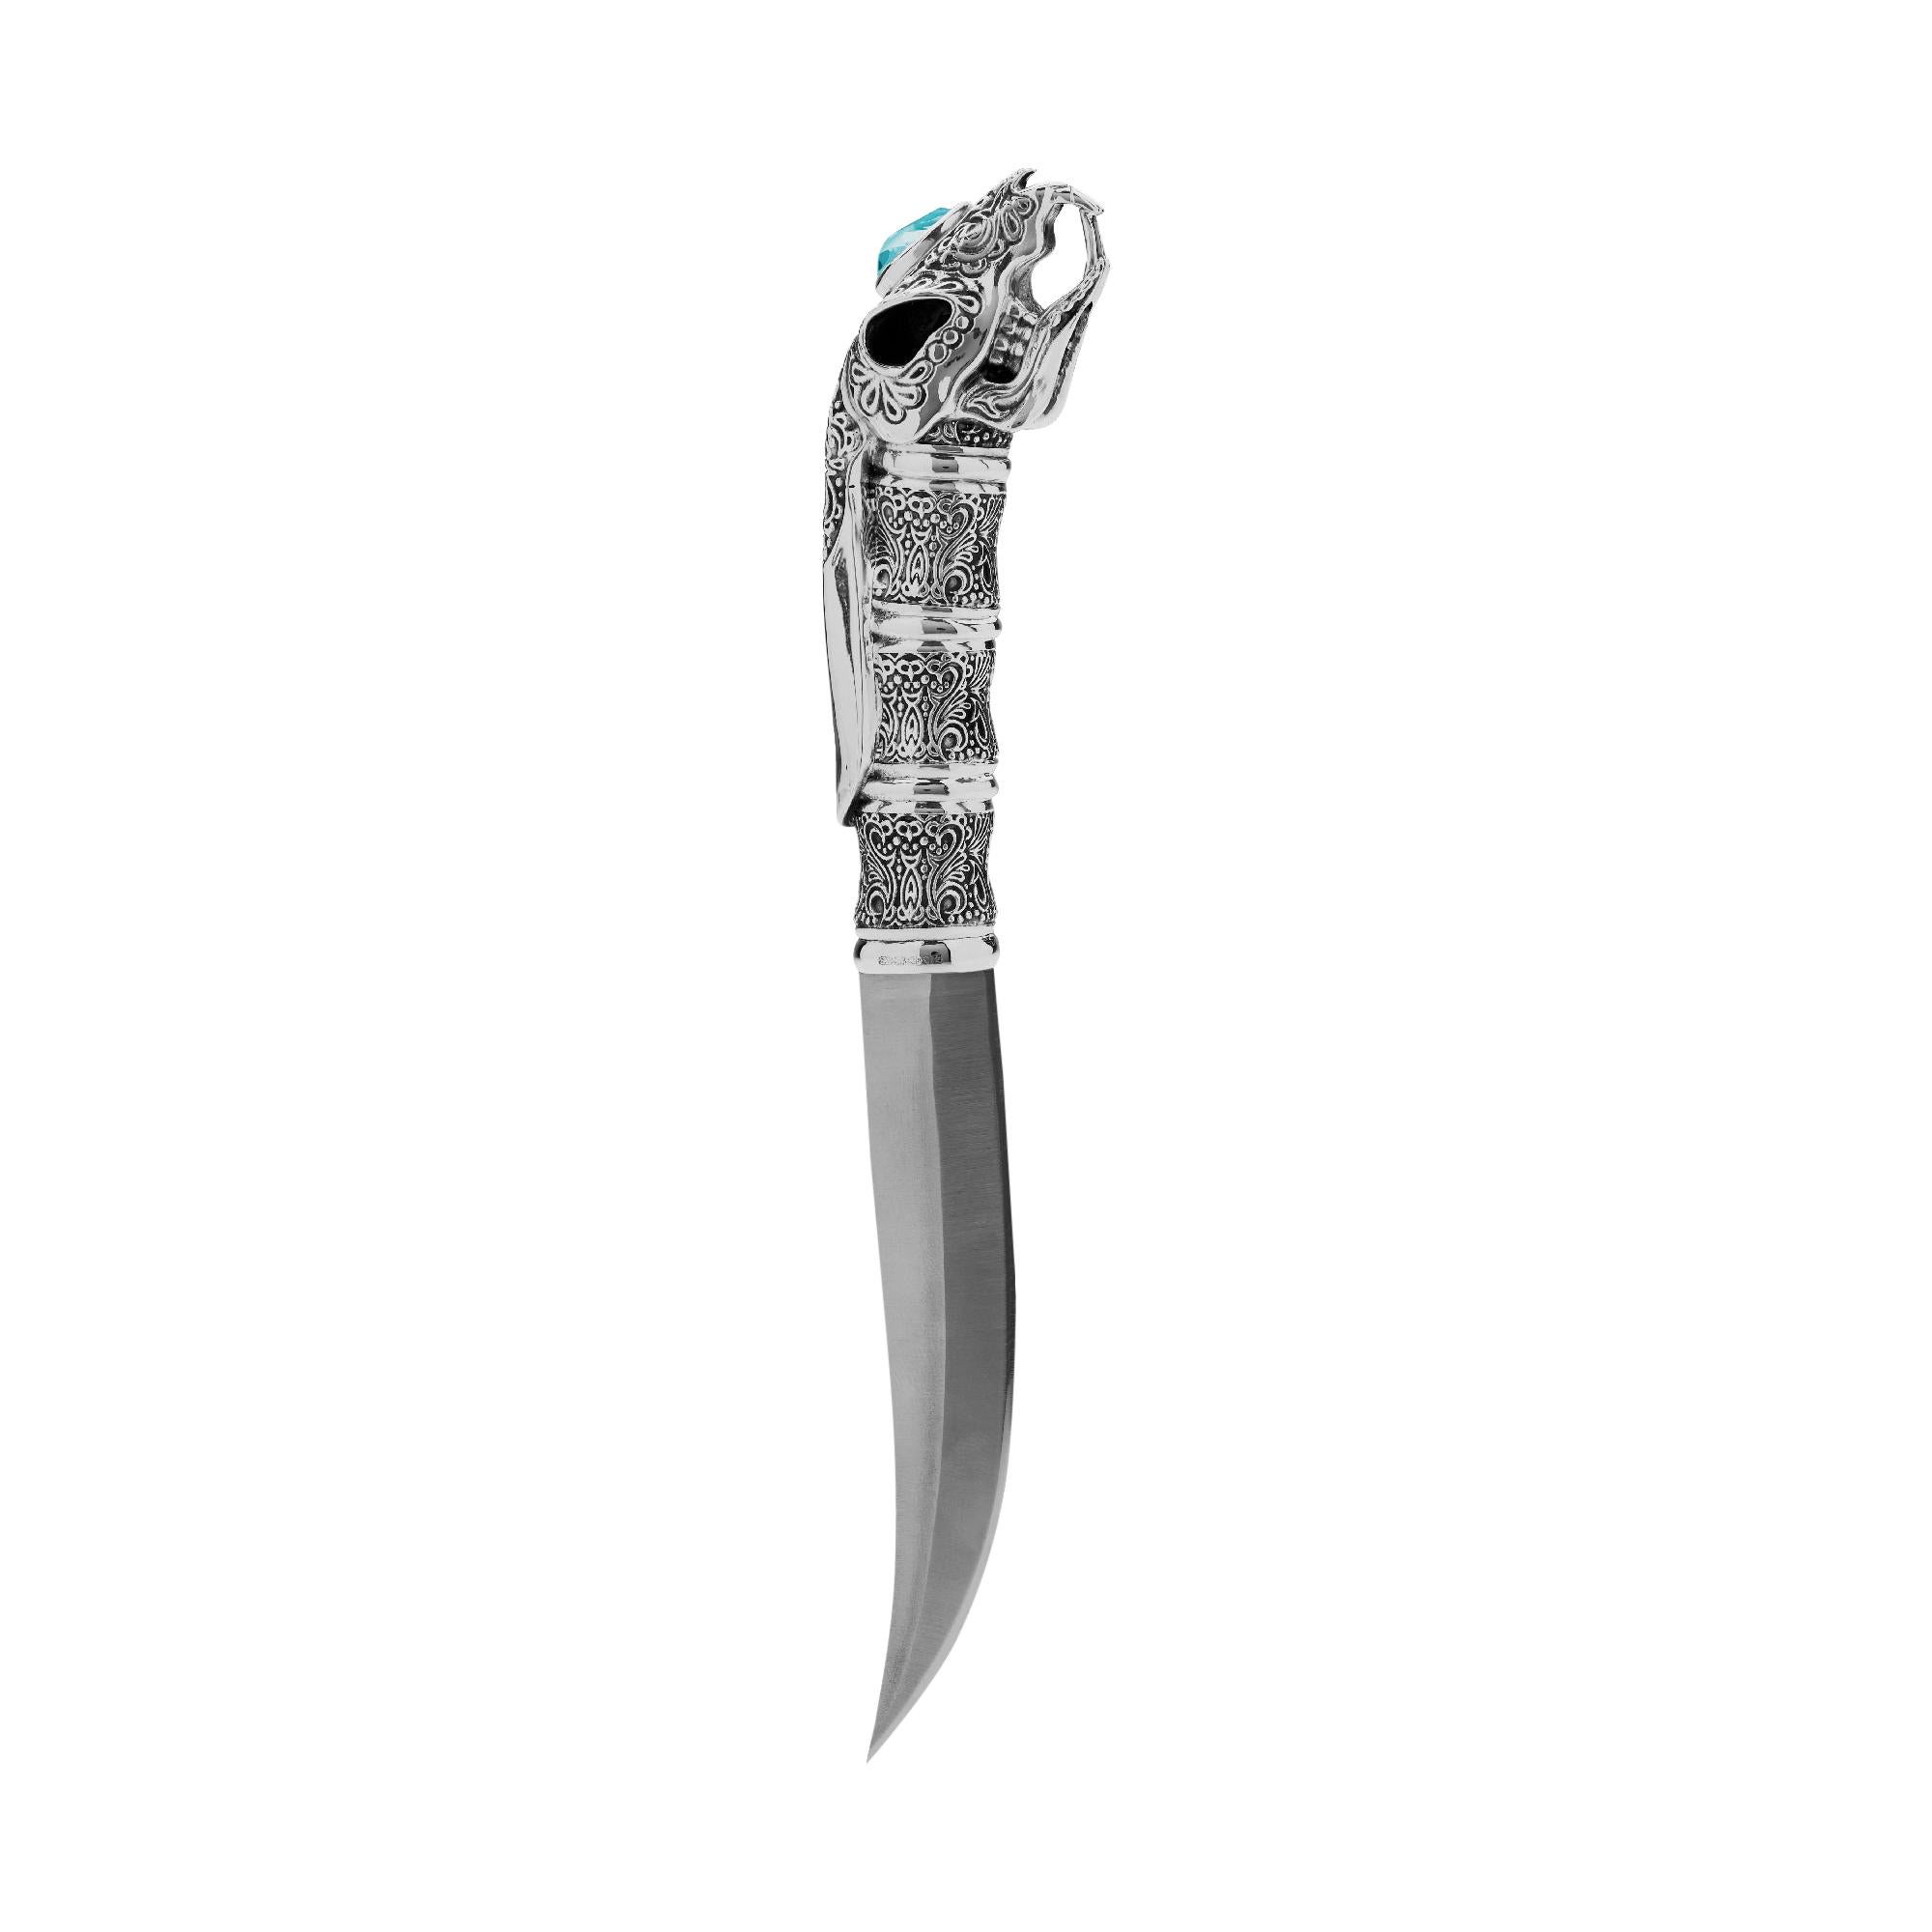 Stephen Webster Tequila Lore Rabbit Silver Knife with Turquoise Crystal Haze For Sale